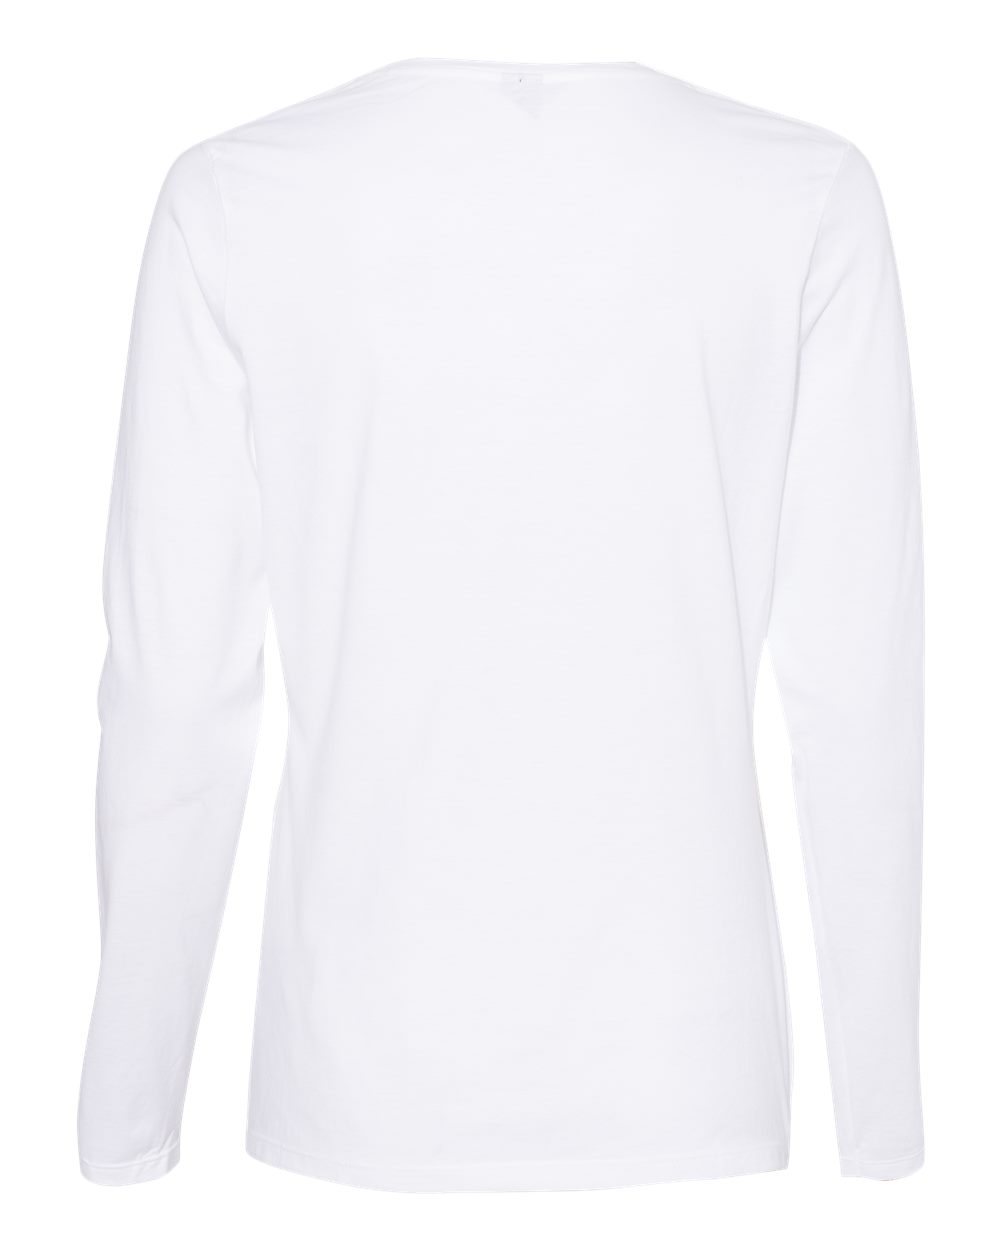 Hanes Women's Long-Sleeve Crew-Neck Top, White Stripe, Small at